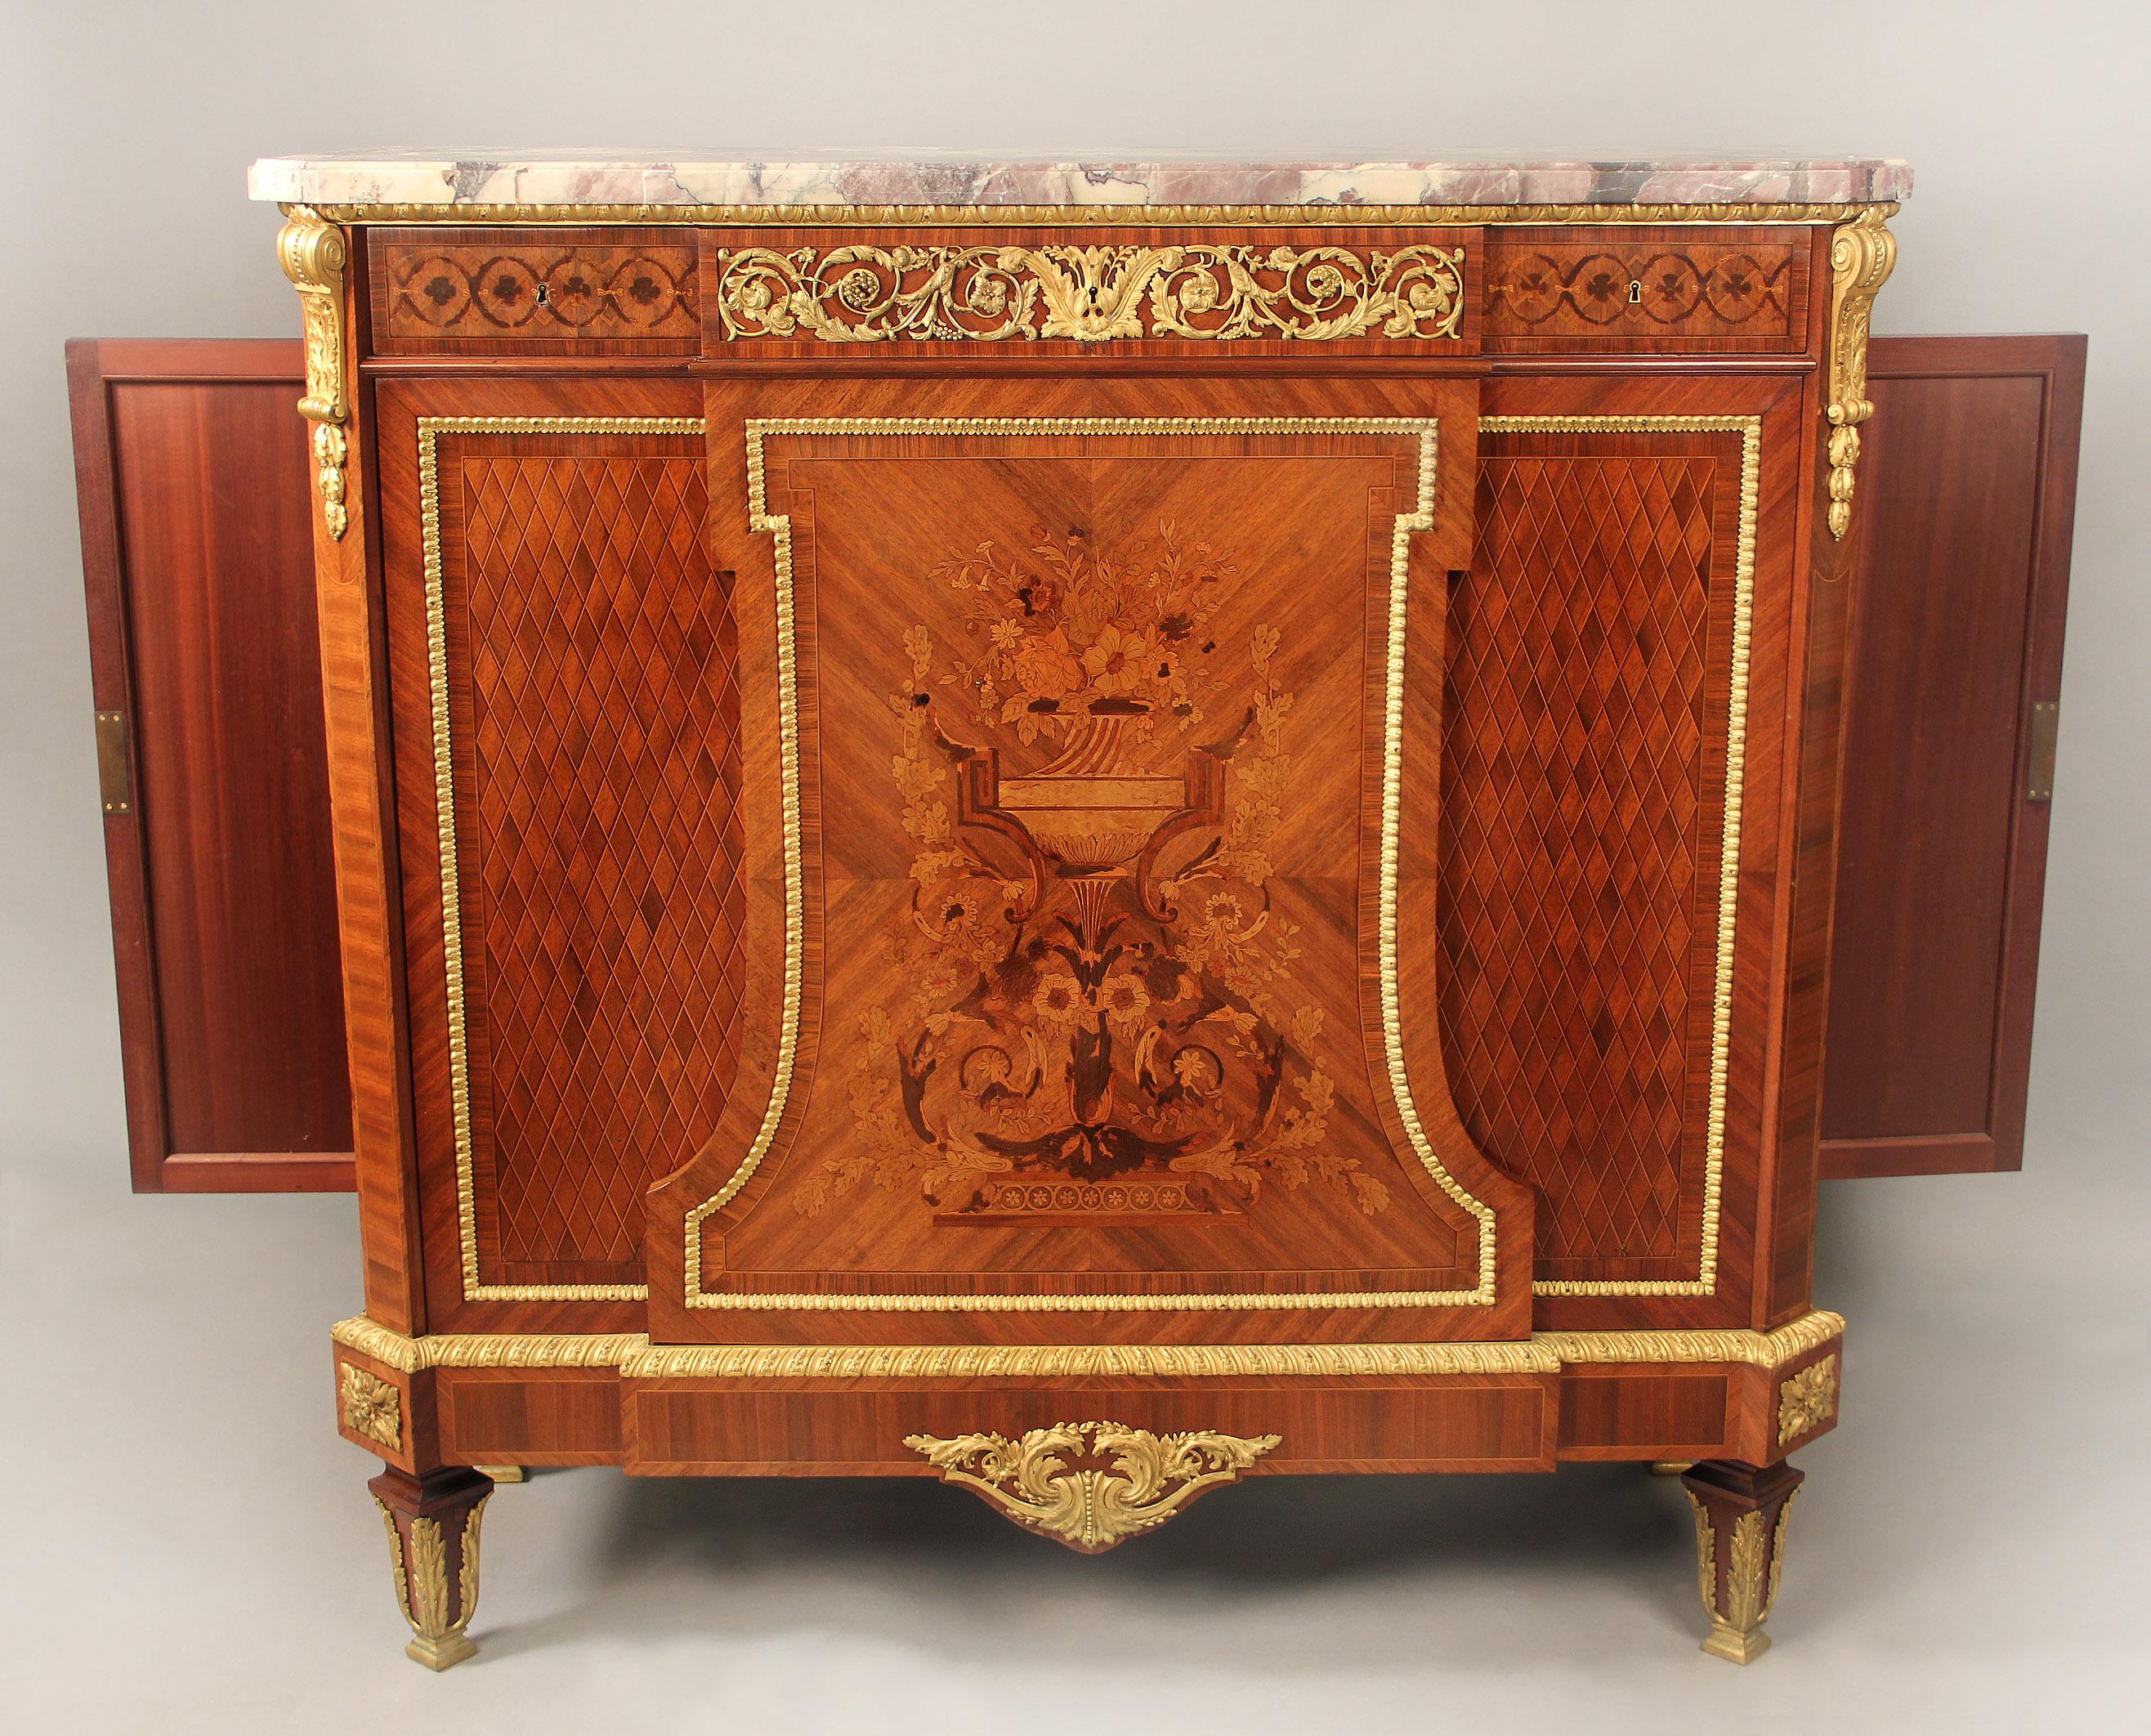 A wonderful Late 19th century Louis XVI style gilt bronze mounted marquetry and parquetry cabinet by Maison Forest, Paris

Maison Forest

The breche violette marble top above a center frieze drawer designed with bronze mounts of flowers and